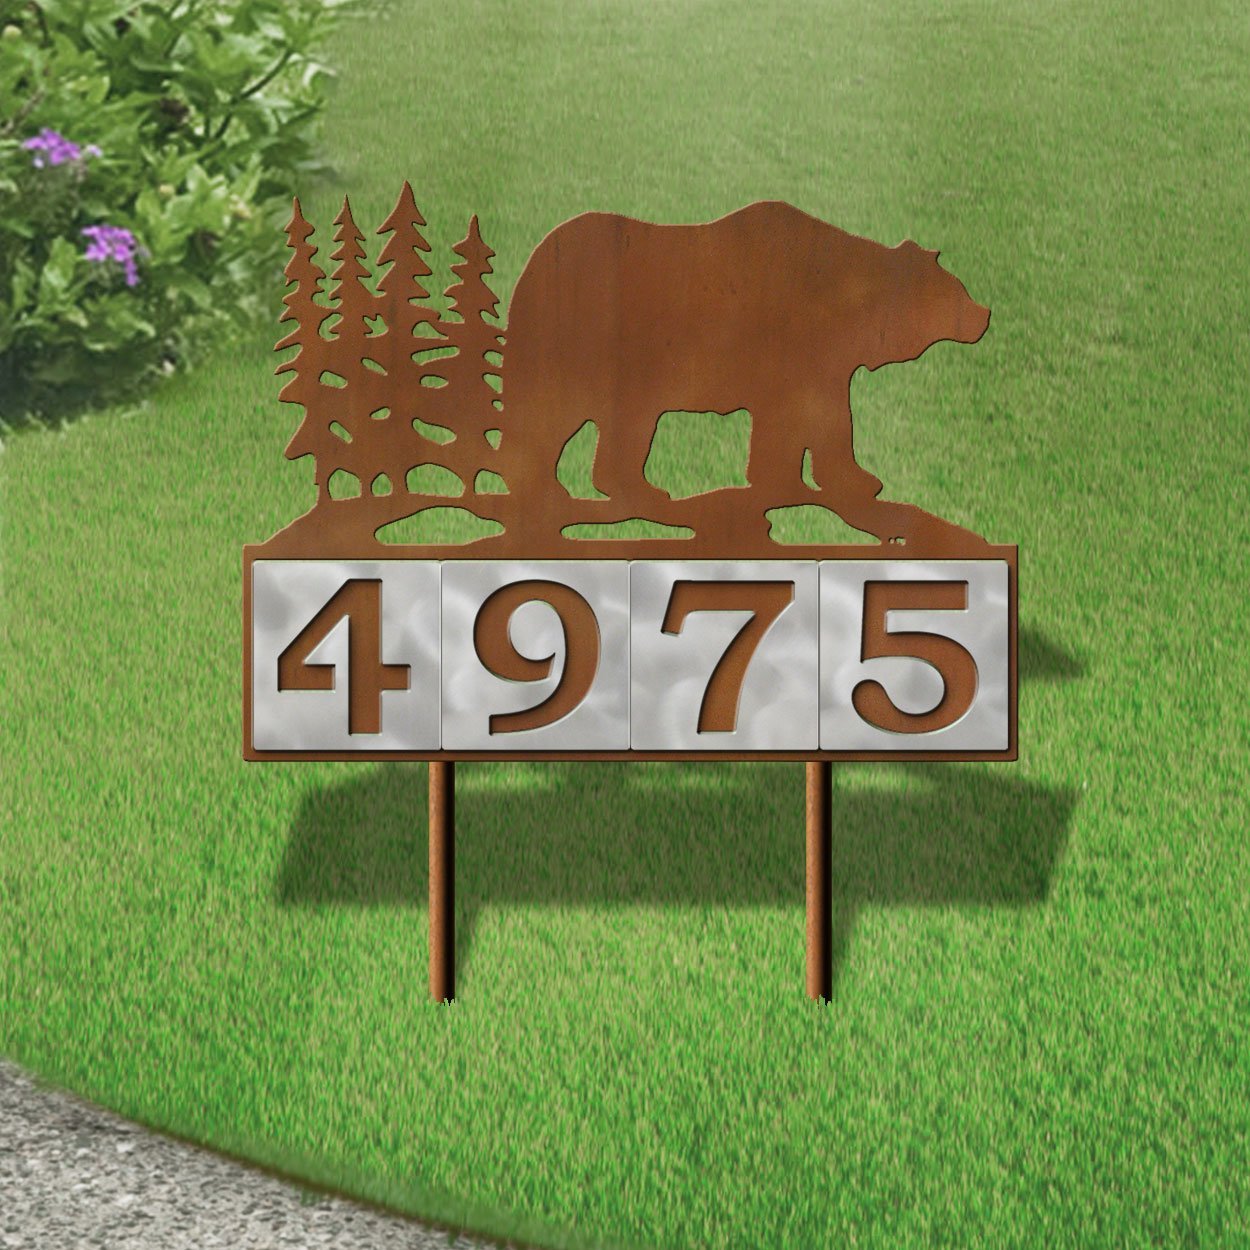 610024 - Bear in the Woods Design 4-Digit Horizontal 6-inch Tile Outdoor House Numbers Yard Sign